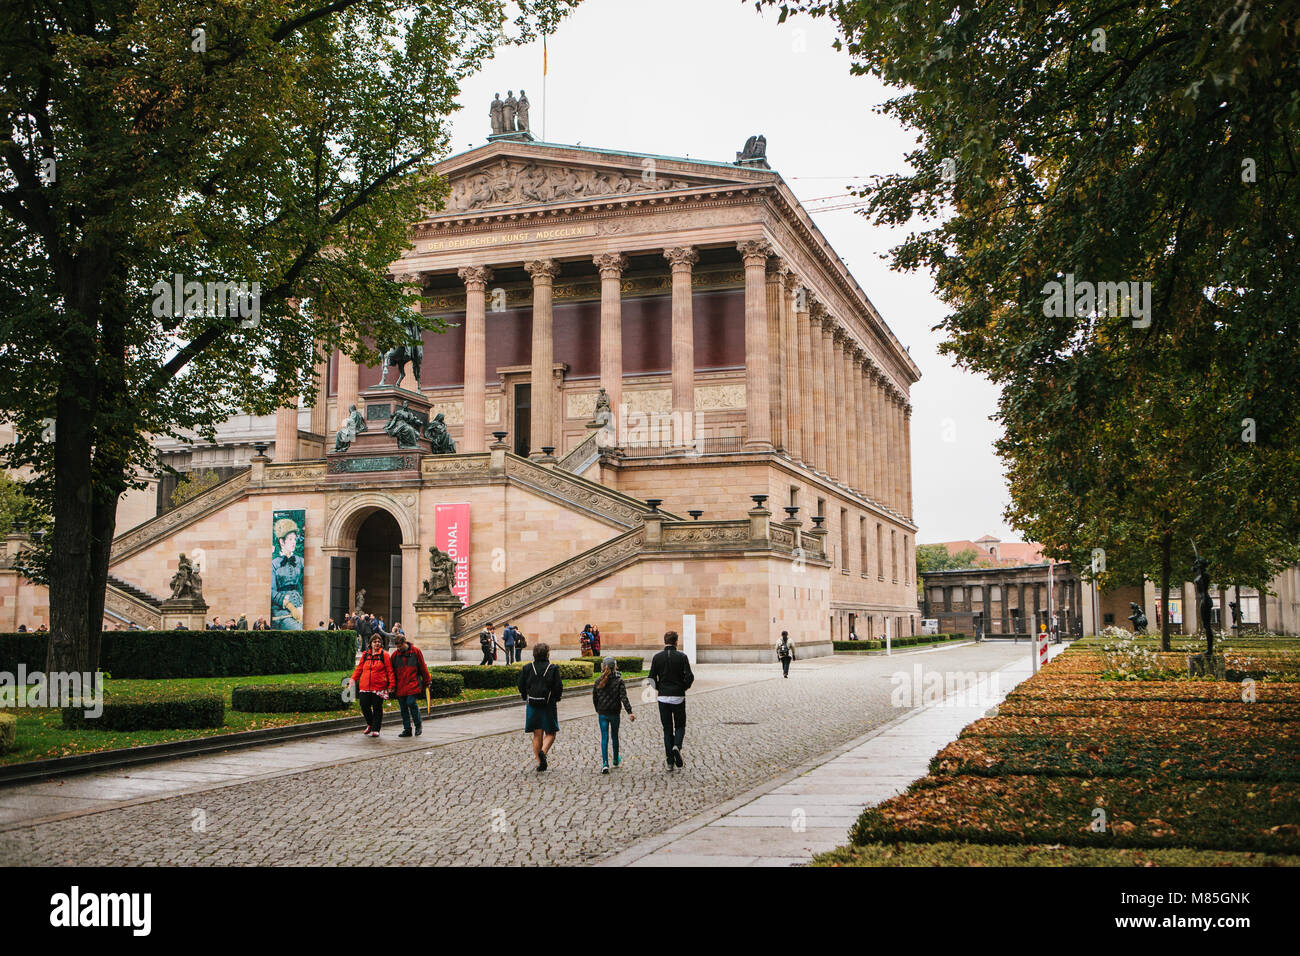 Berlin, October 1, 2017: Beautiful old building of the Berlin national gallery with advertising posters and tourists Stock Photo